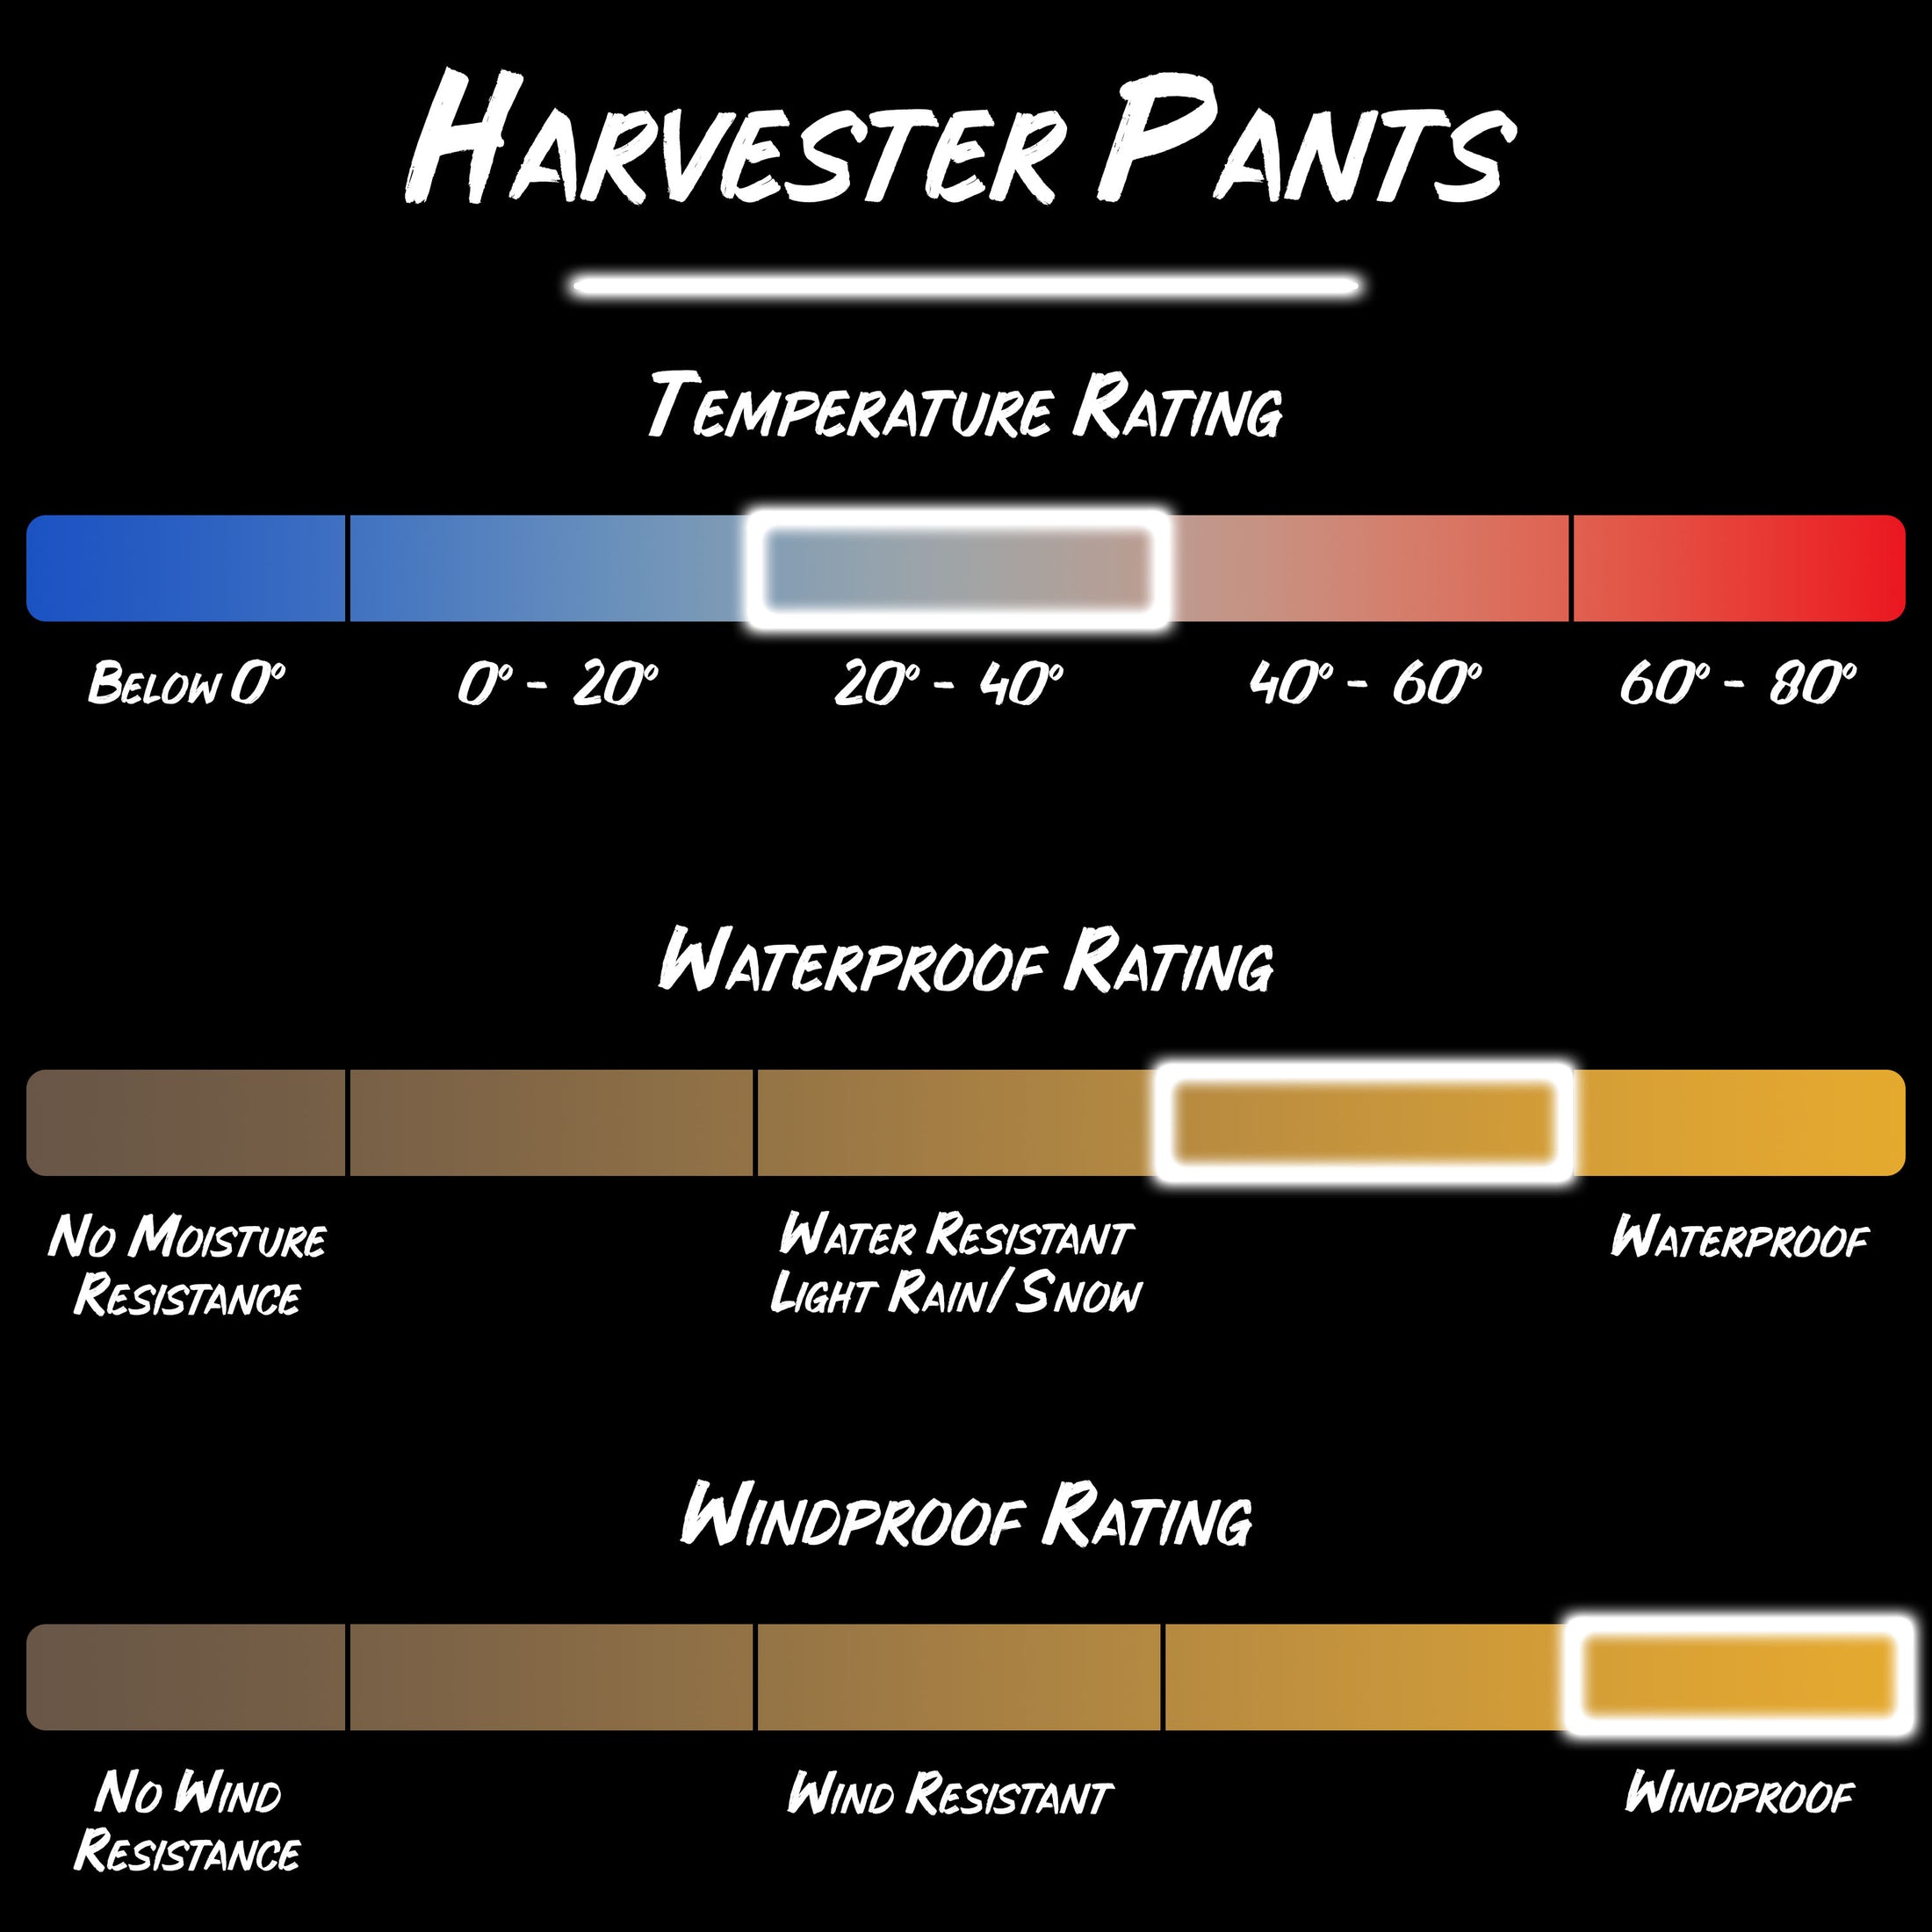 Gamekeeper harvester pants product specifications